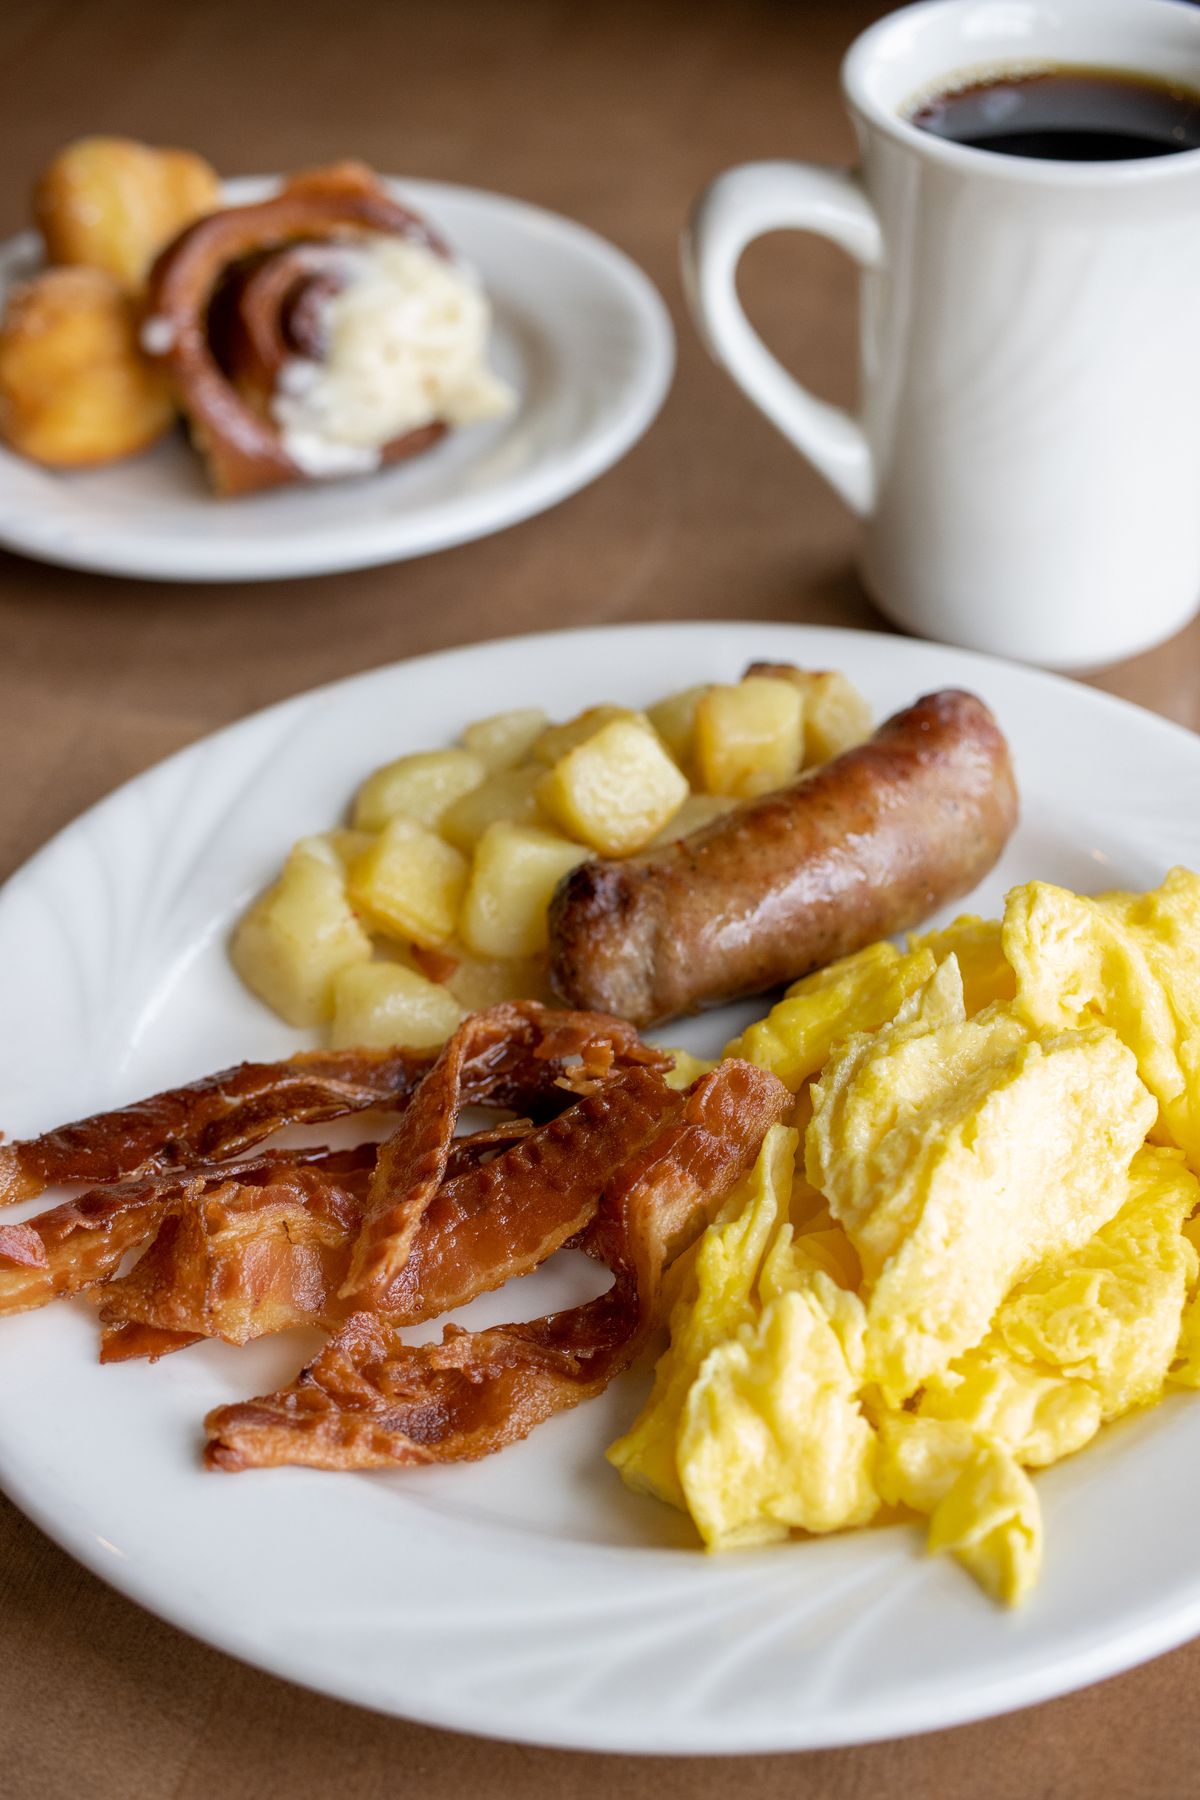 A well-balanced breakfast plate featuring scrambled eggs, crispy bacon strips, a sausage link, diced potatoes, and a cinnamon roll. A white mug of coffee completes the meal.